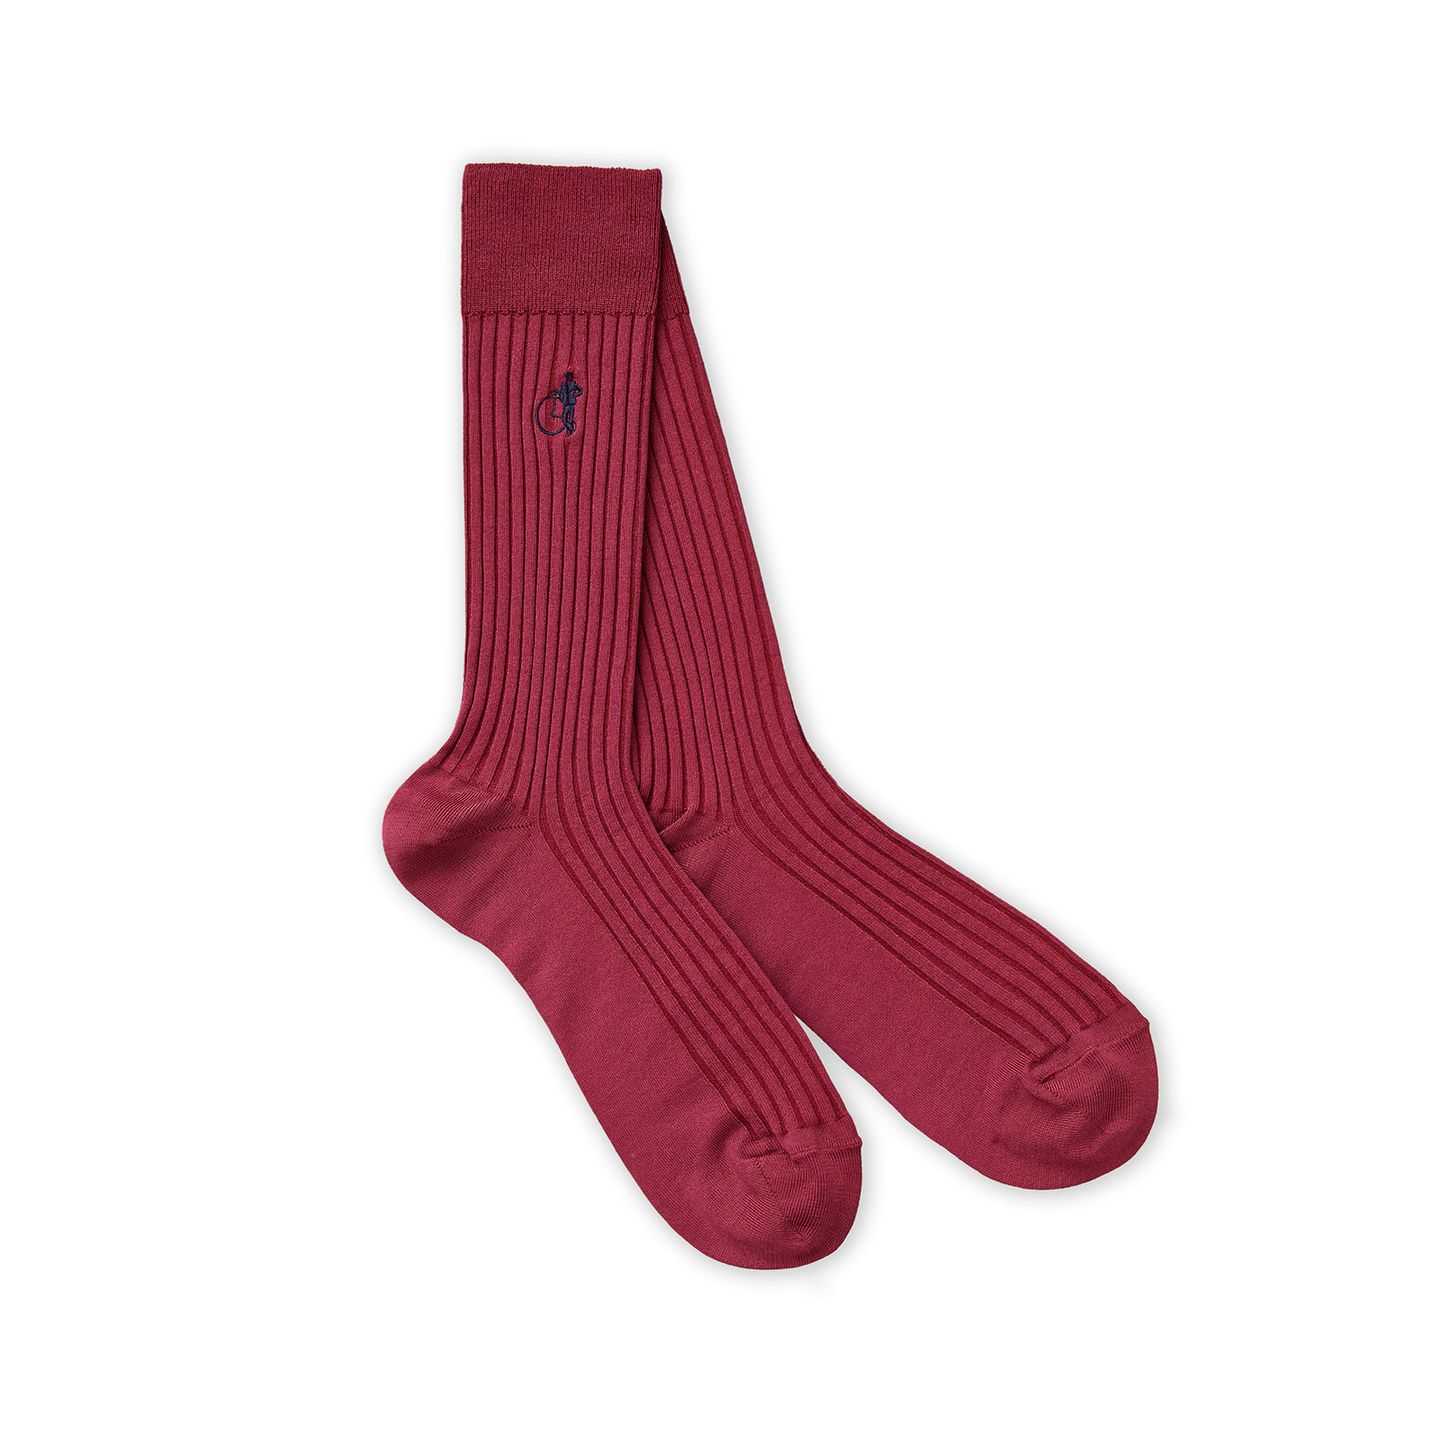 Pair of mulberry socks on a white background